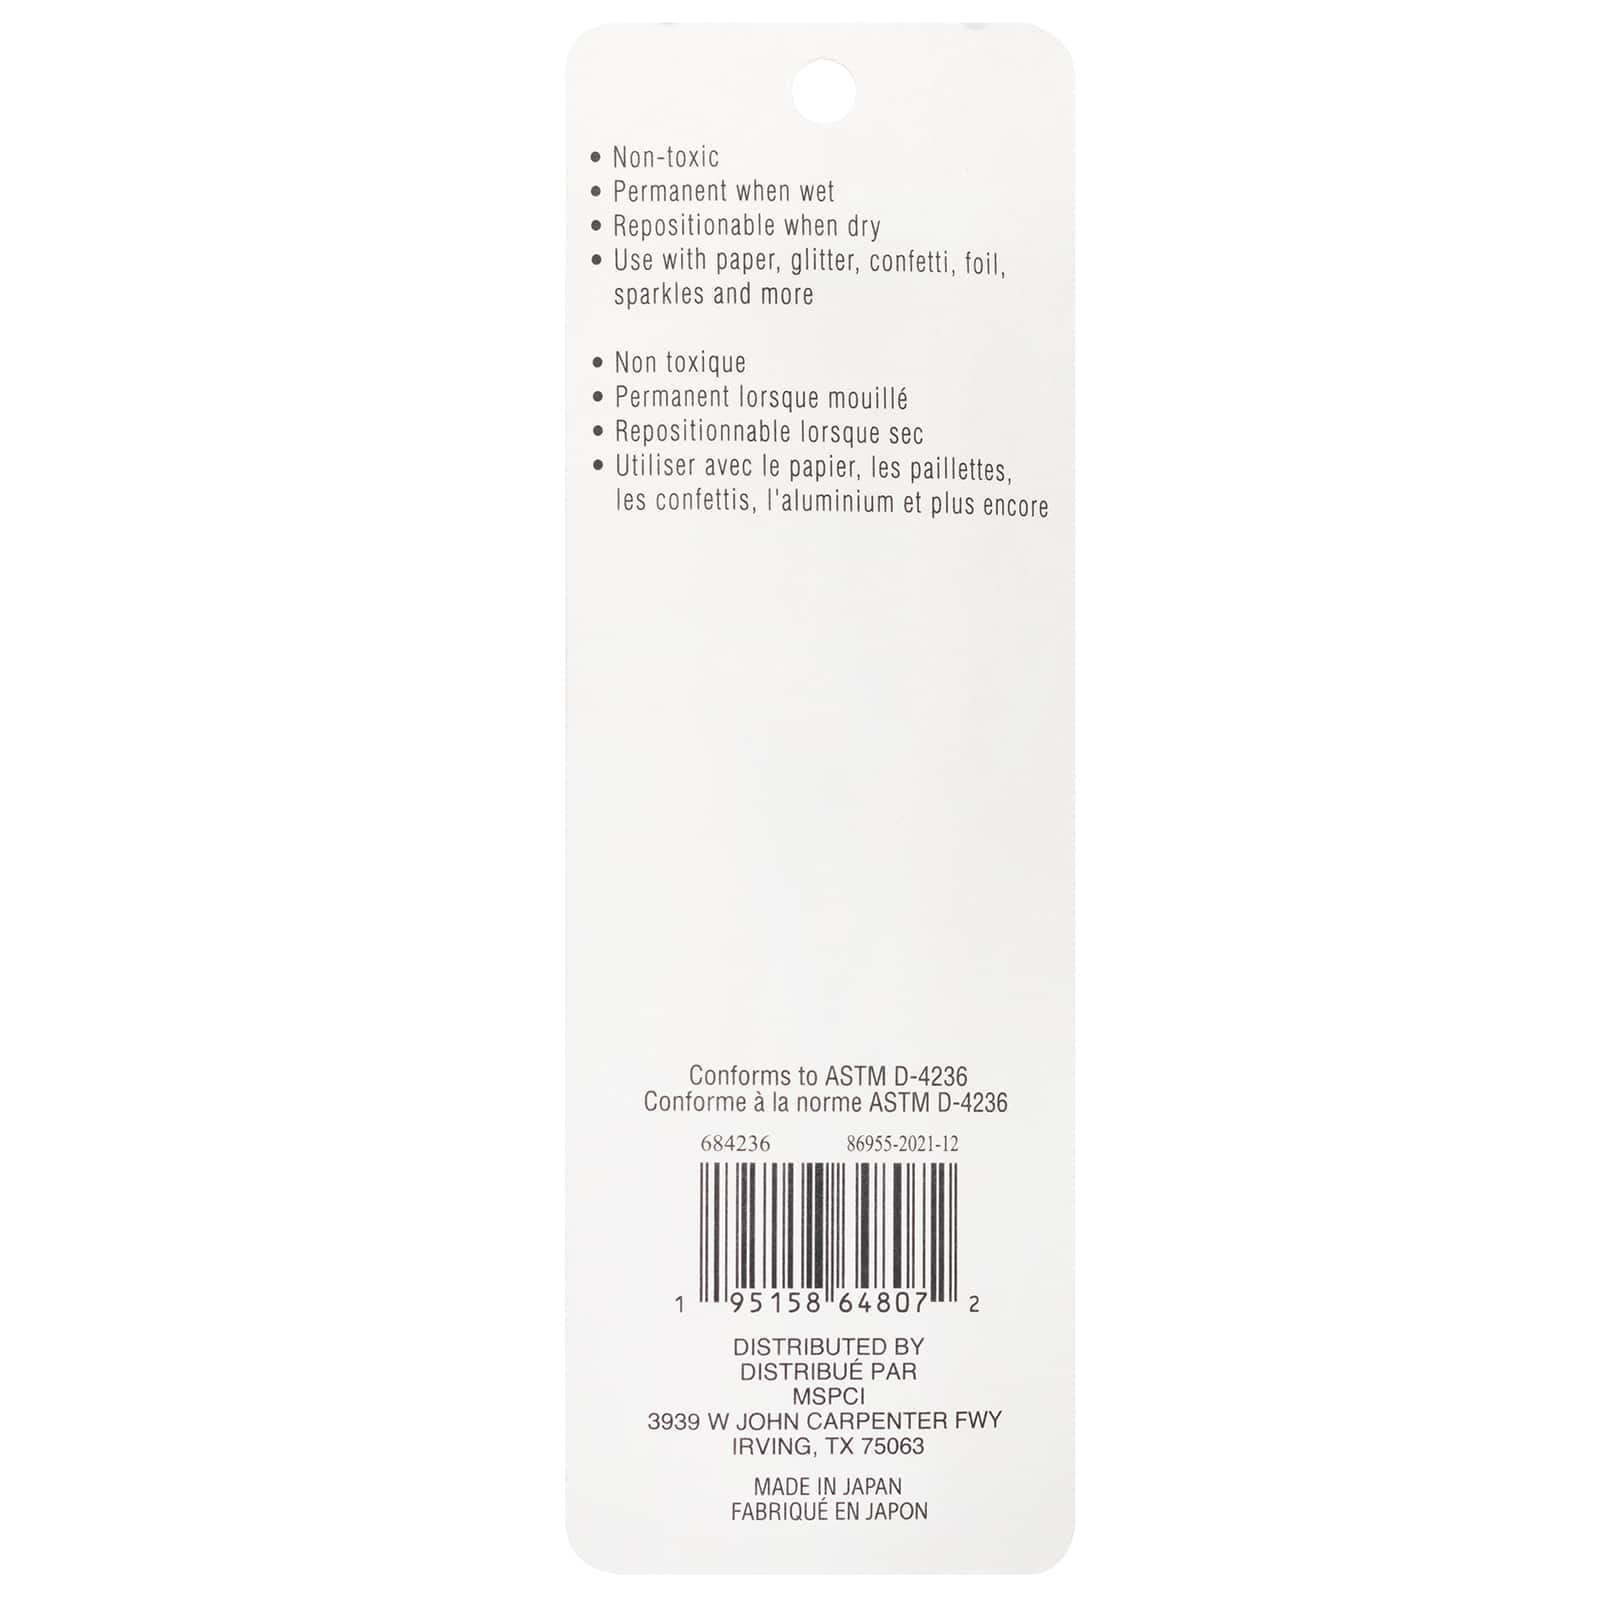 2-Way Glue Pen Variety ct by Recollections | Michaels